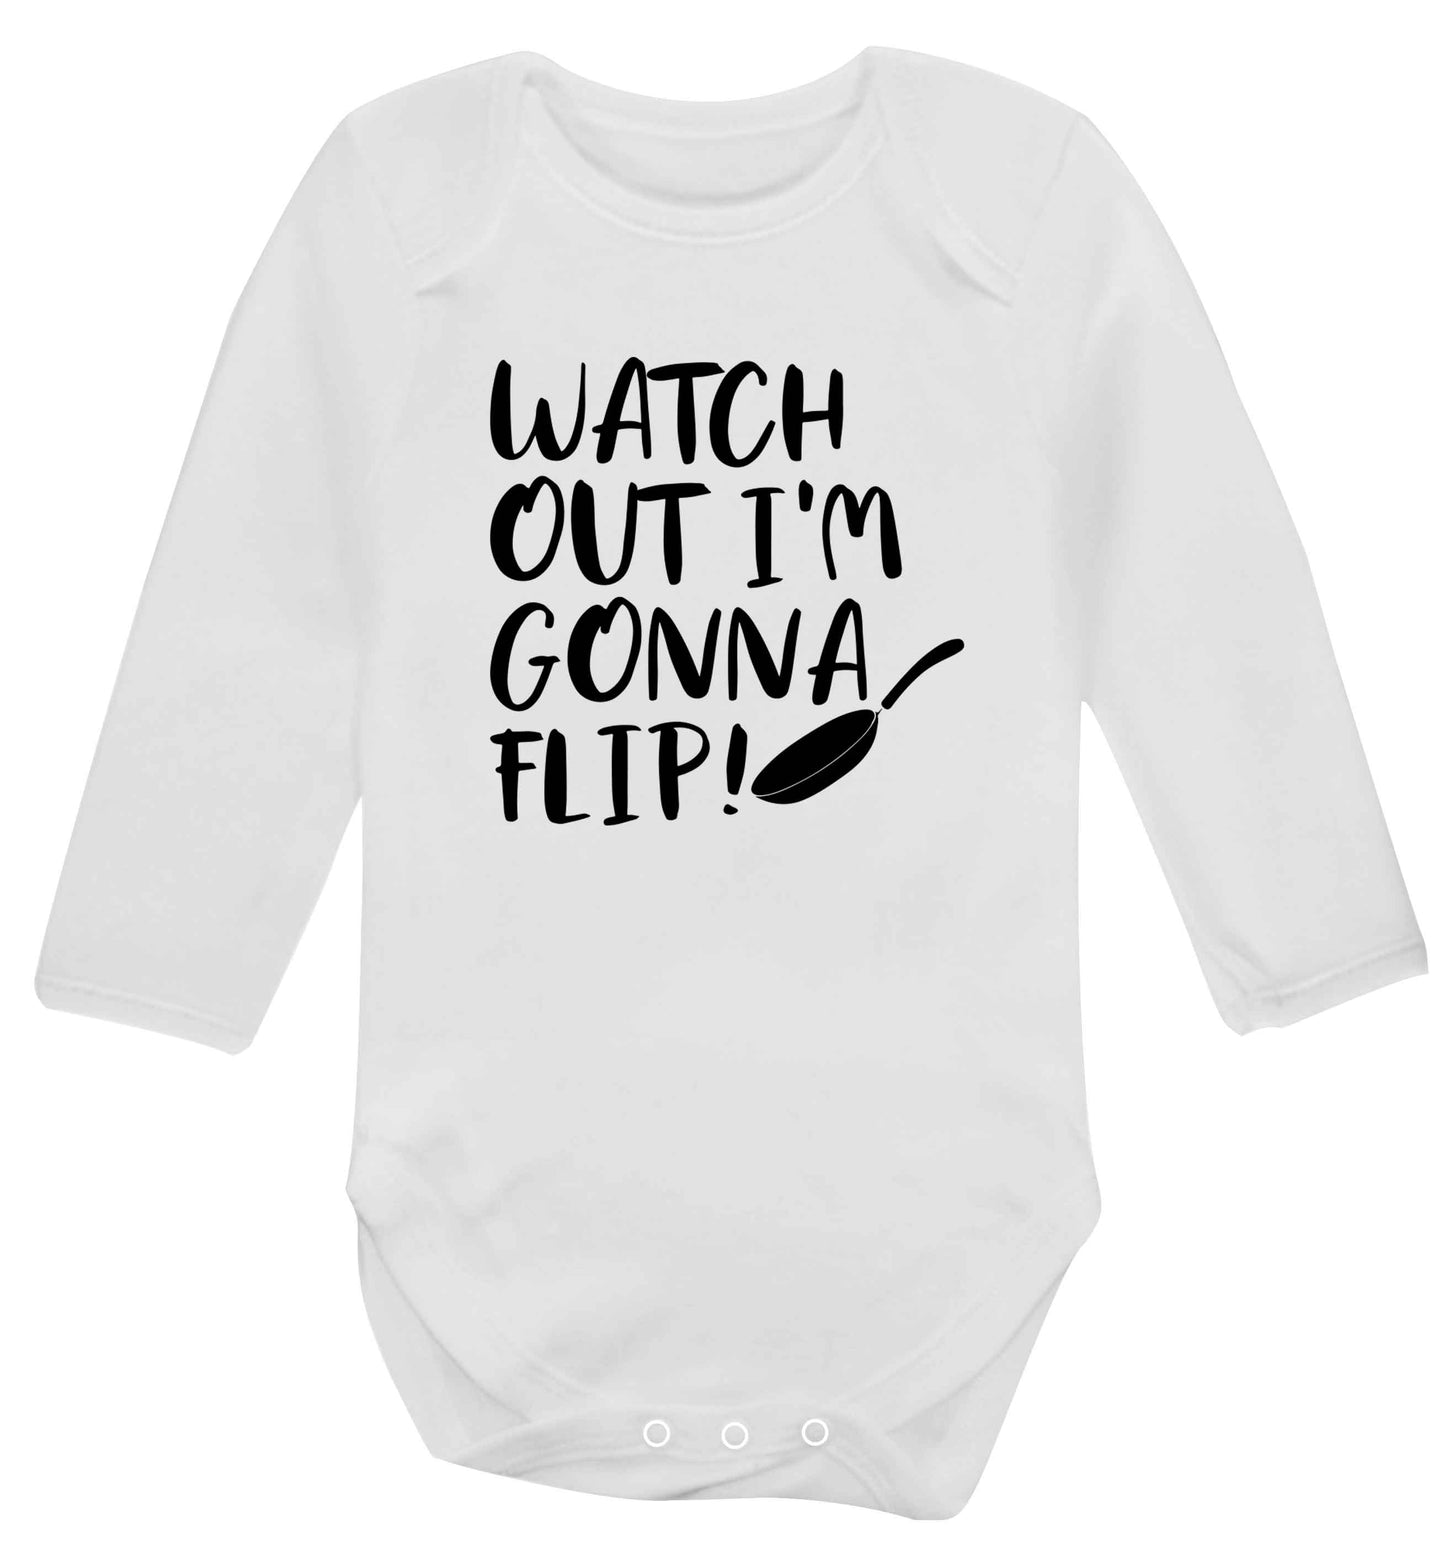 Watch out I'm gonna flip! baby vest long sleeved white 6-12 months